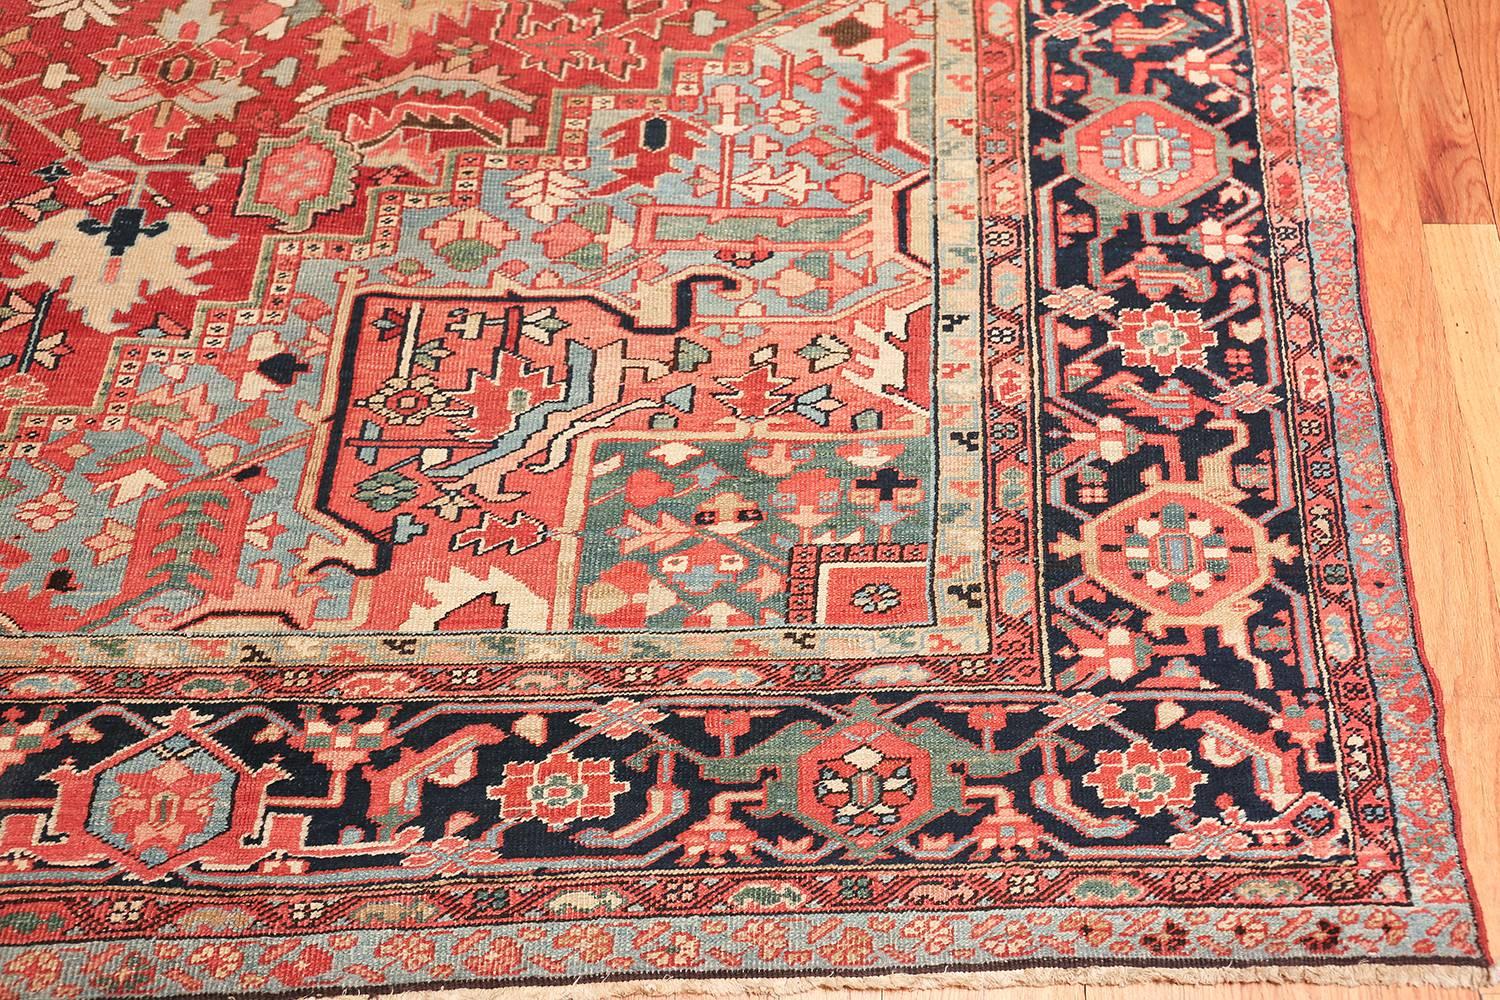 Hand-Knotted Room Size Geometric Antique Persian Heriz Rug. Size: 11 ft x 14 ft 4 in